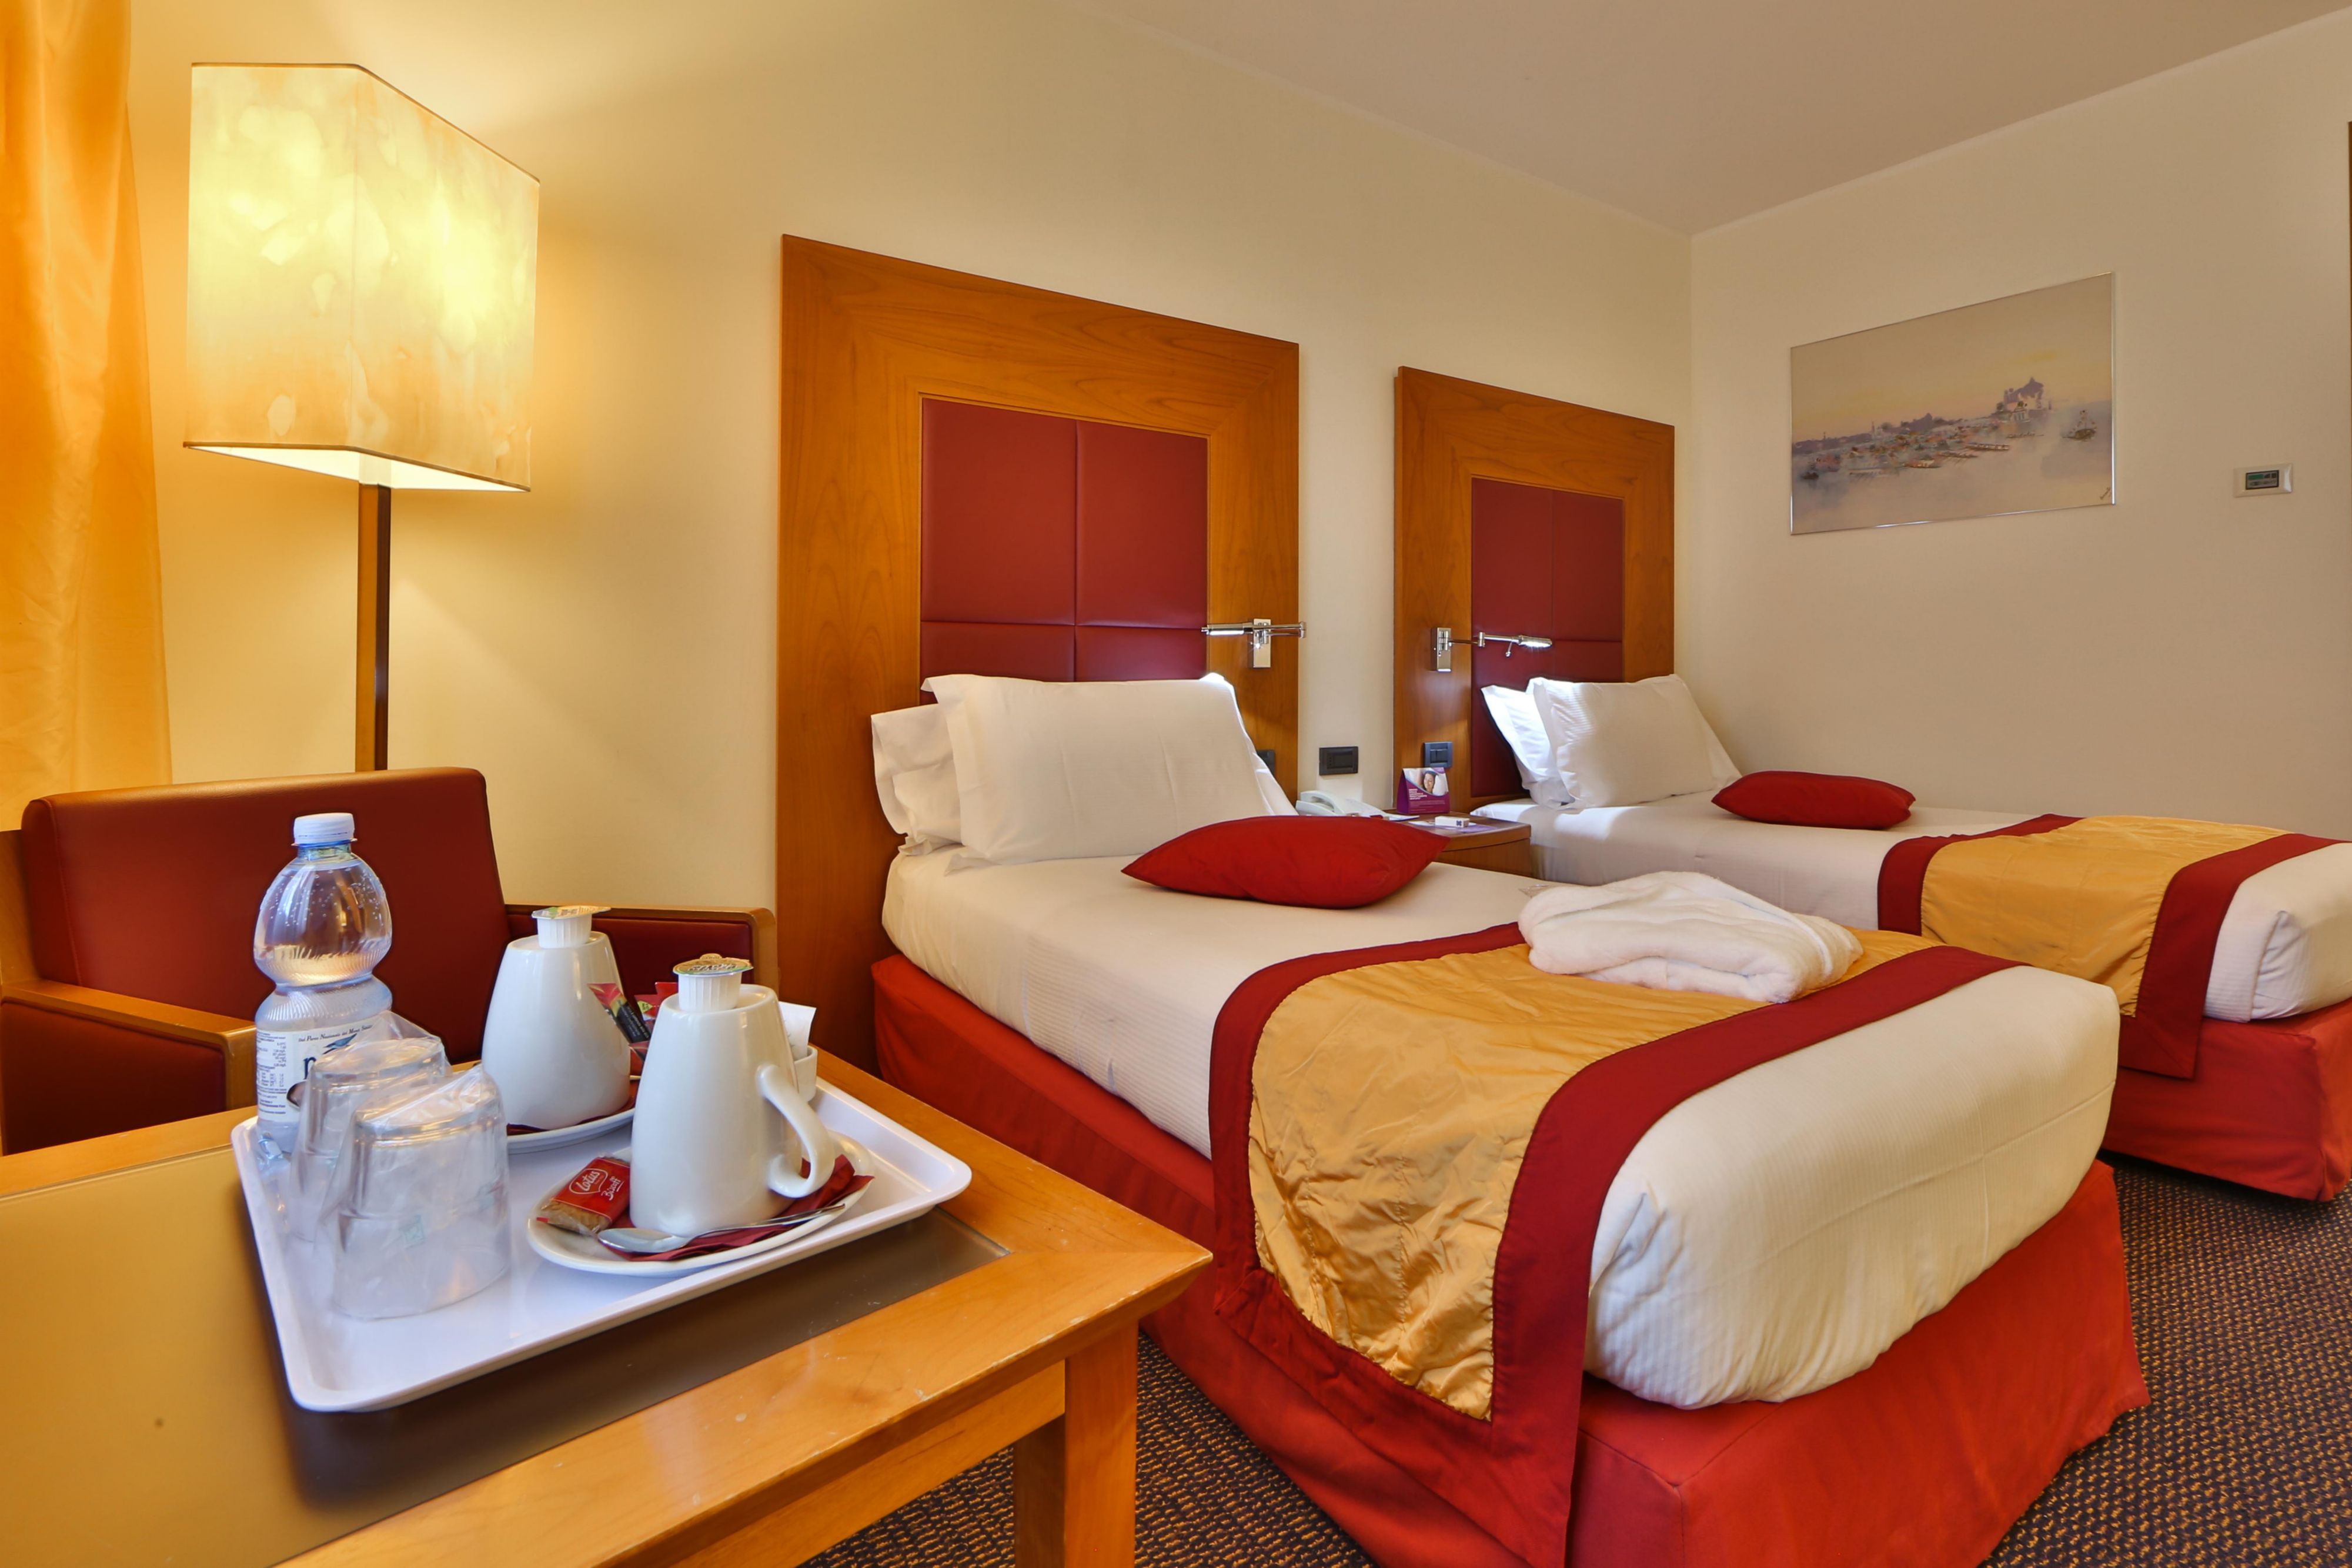 For your stay, choose our twin beds room